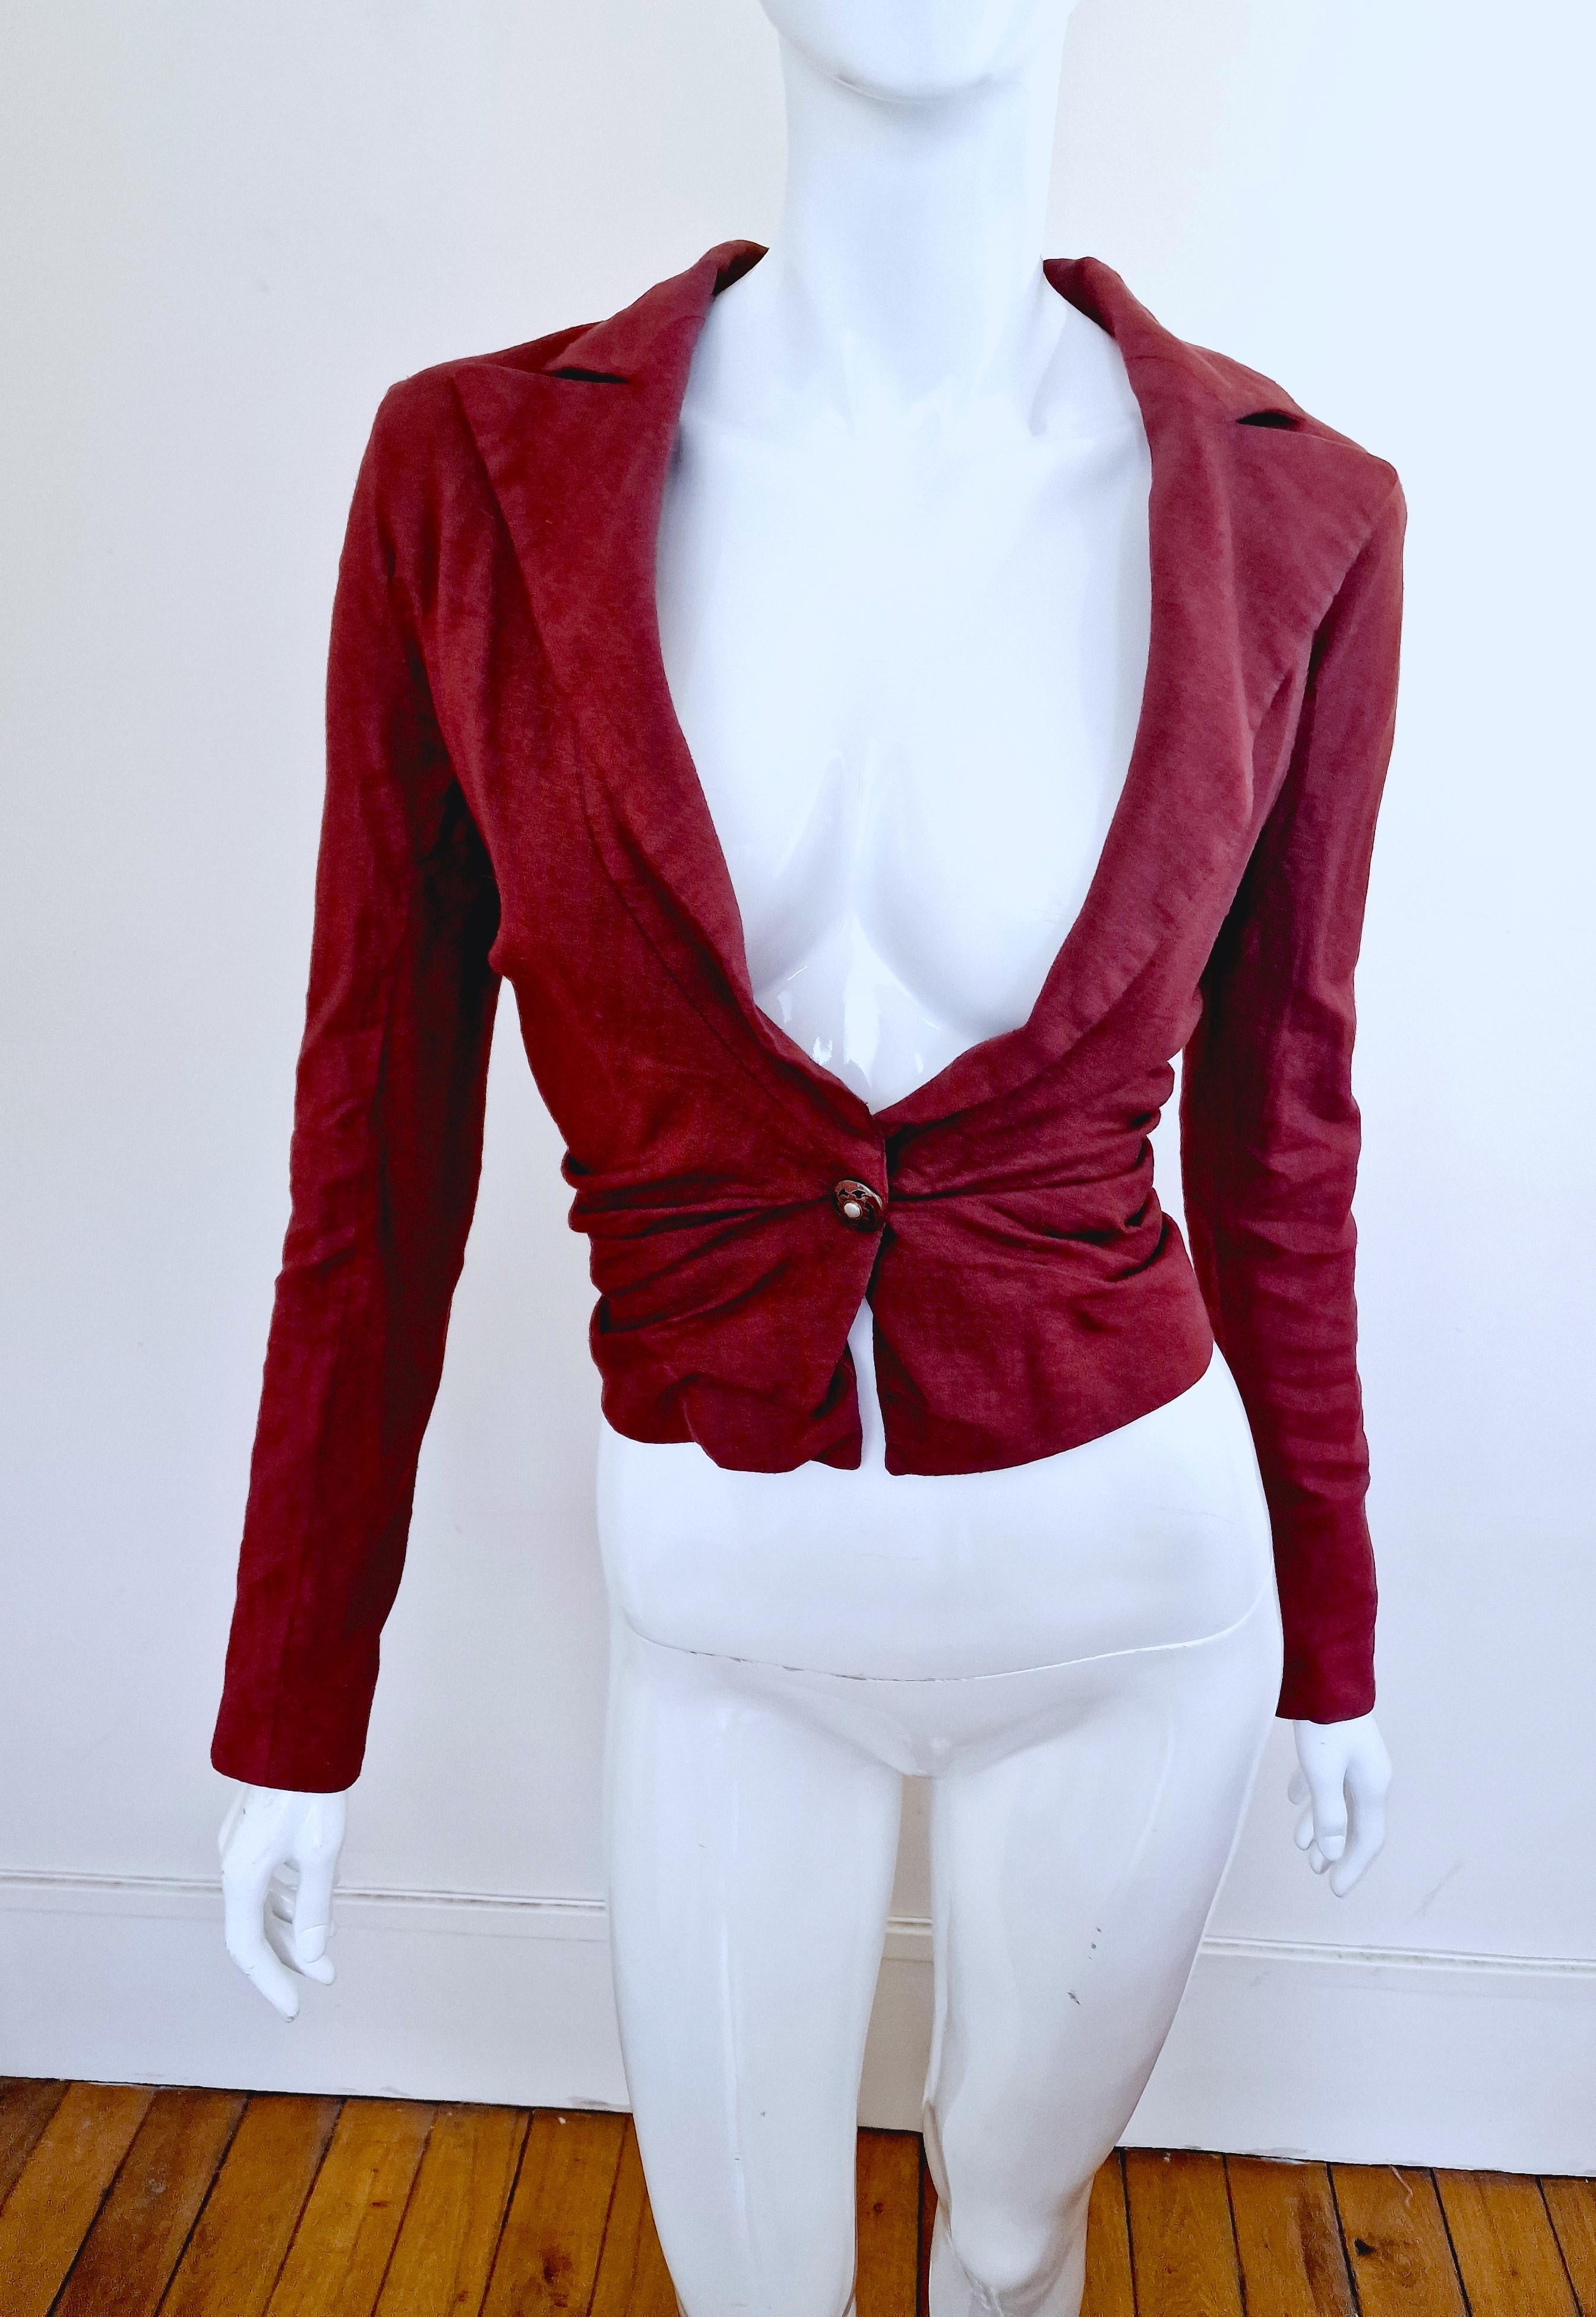 Bordeaux jacket by John Galliano!
Ruched!
Deep cut front.

VERY GOOD Condition!

SIZE
Fits for XS.
Marked size: FR38 / GB10.
Length: 60 cm / 23.6 inch 
Bust: 38 cm / 15 inch
Waist: 30 cm / 11.8 inch
Shoulder to shoulder: 40 cm / 15.7 inch
Sleeve: 60